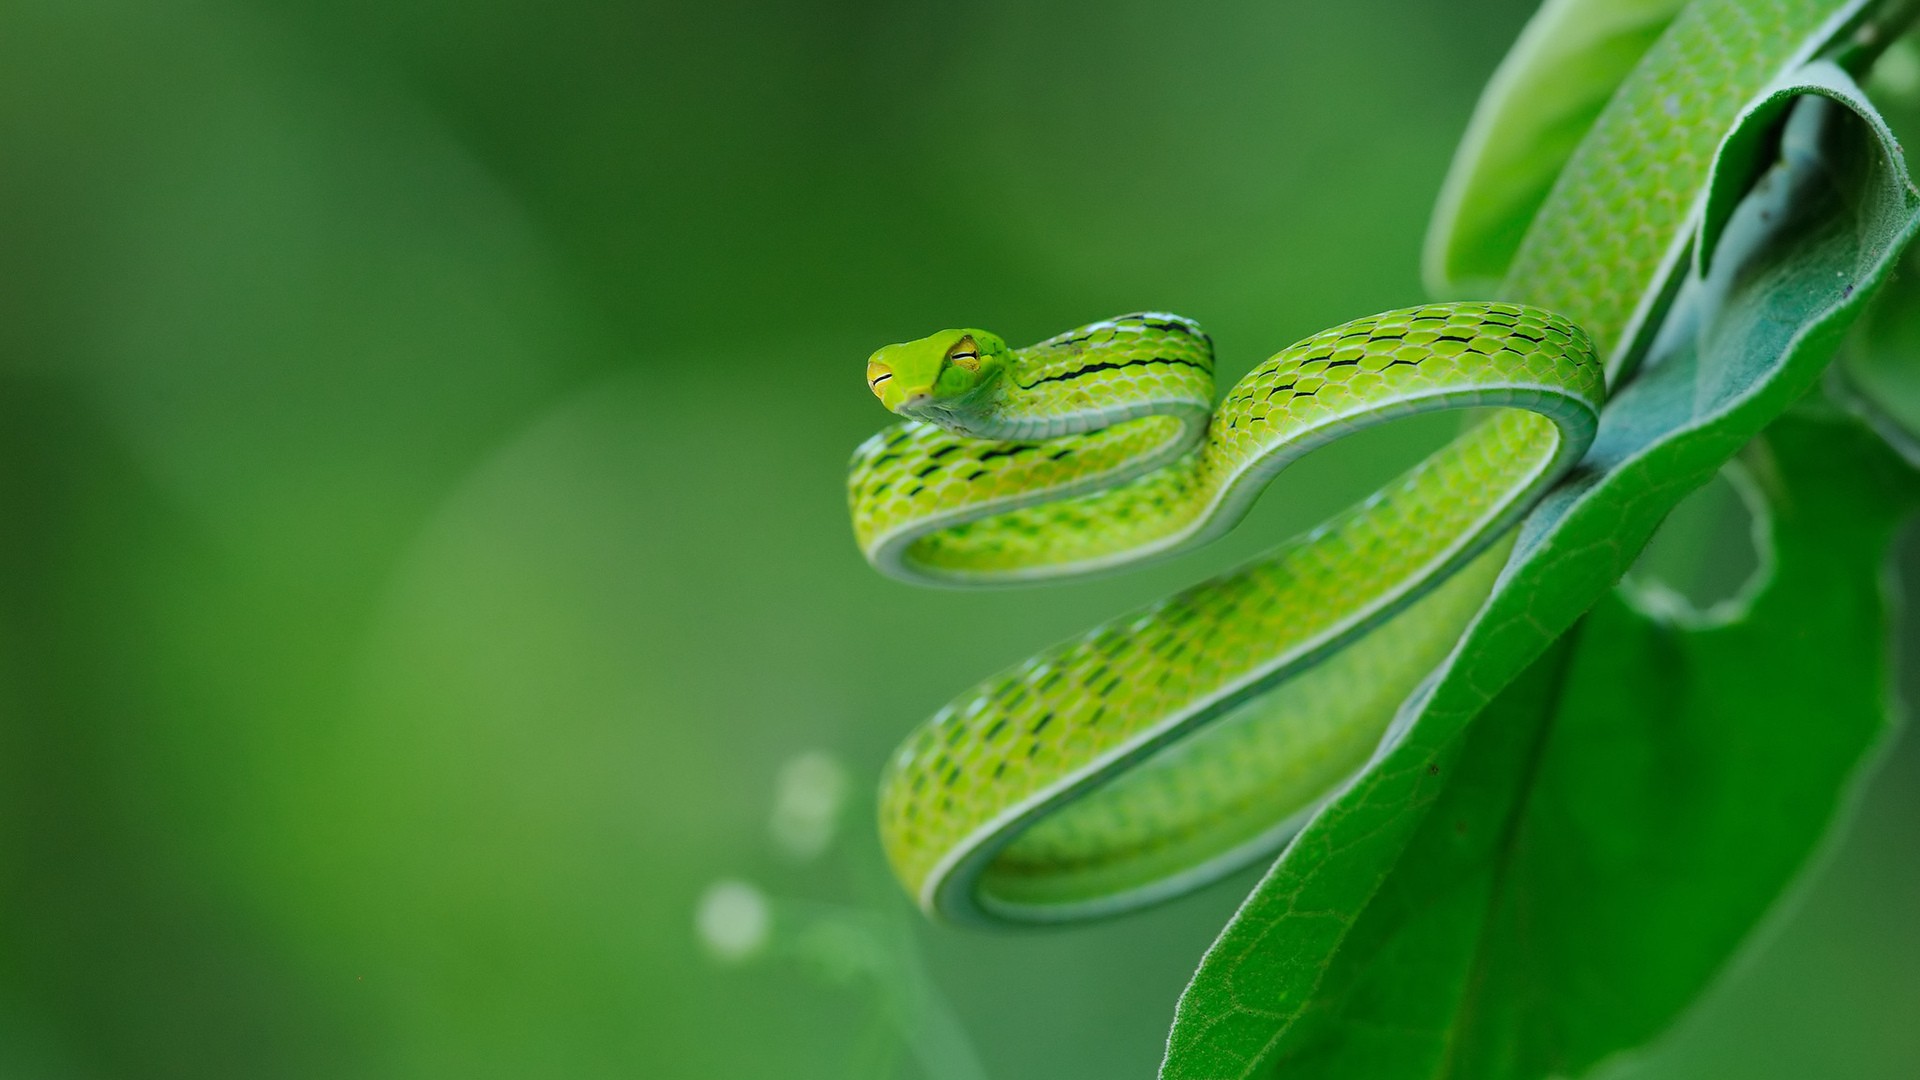 General 1920x1080 nature leaves animals snake macro closeup green depth of field reptiles green background